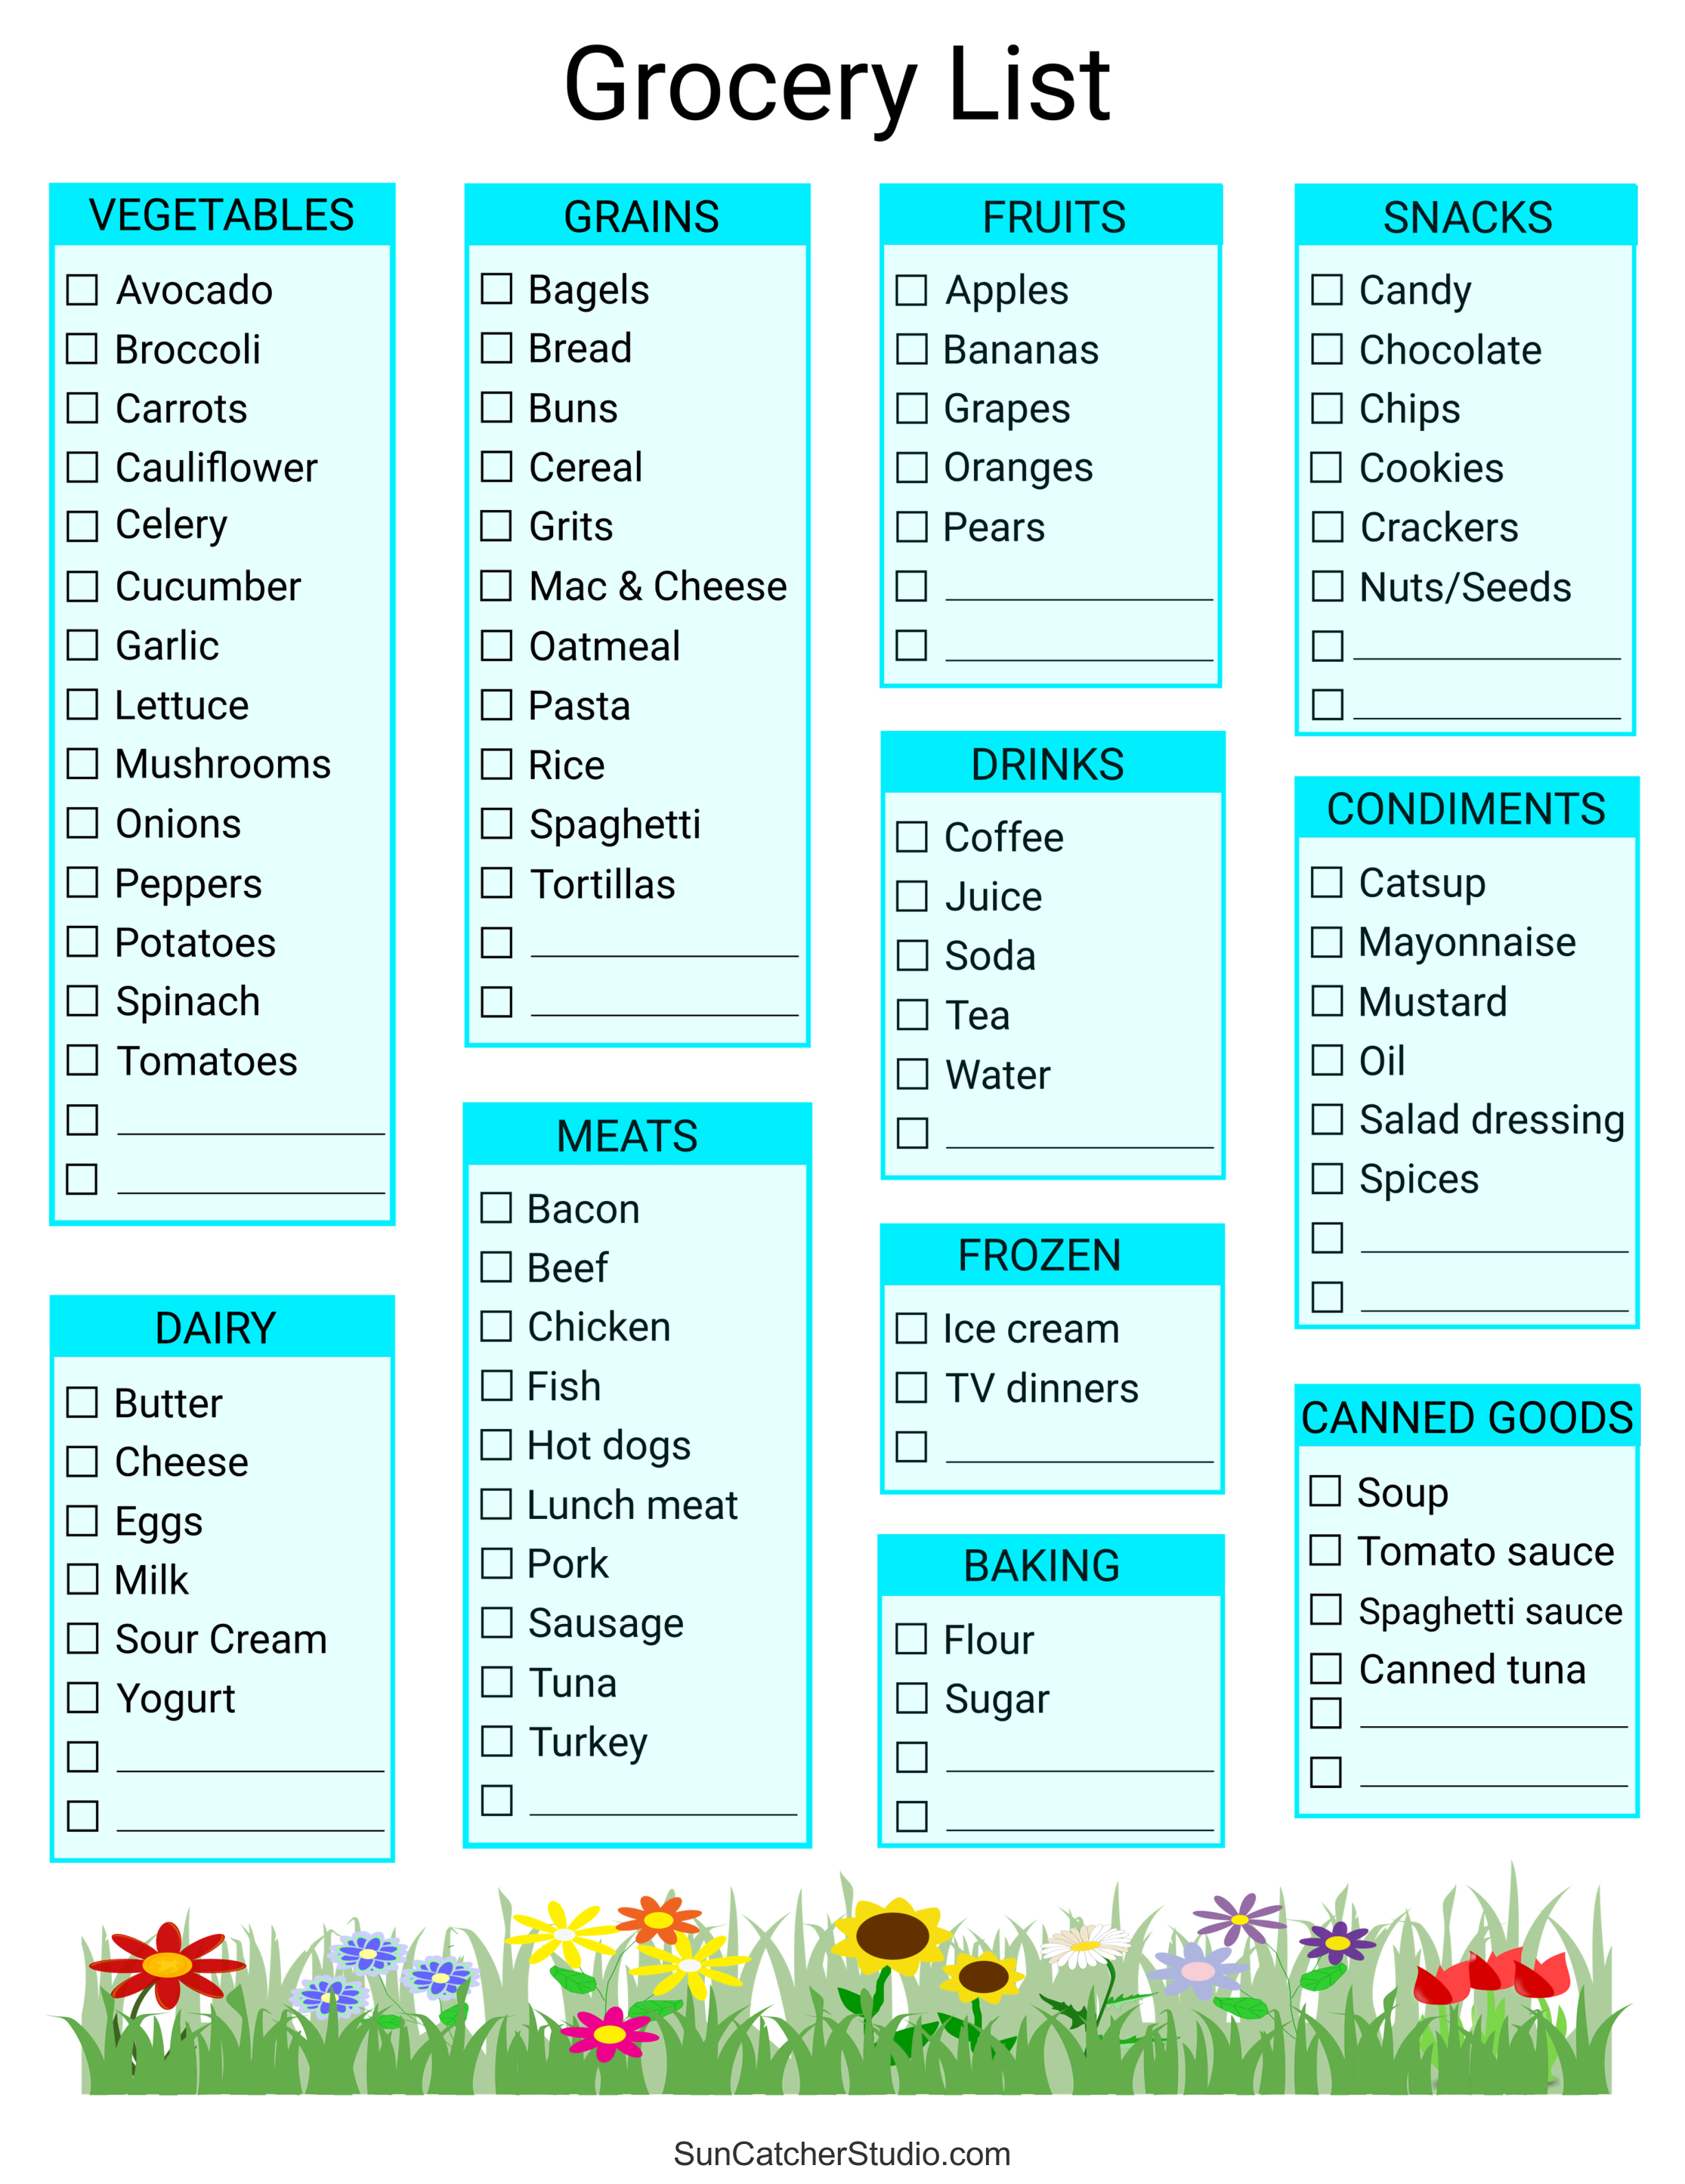 https://suncatcherstudio.com/uploads/printables/grocery-list/pdf-png/free-printable-grocery-list-by-category-2-010101-00eeff.png